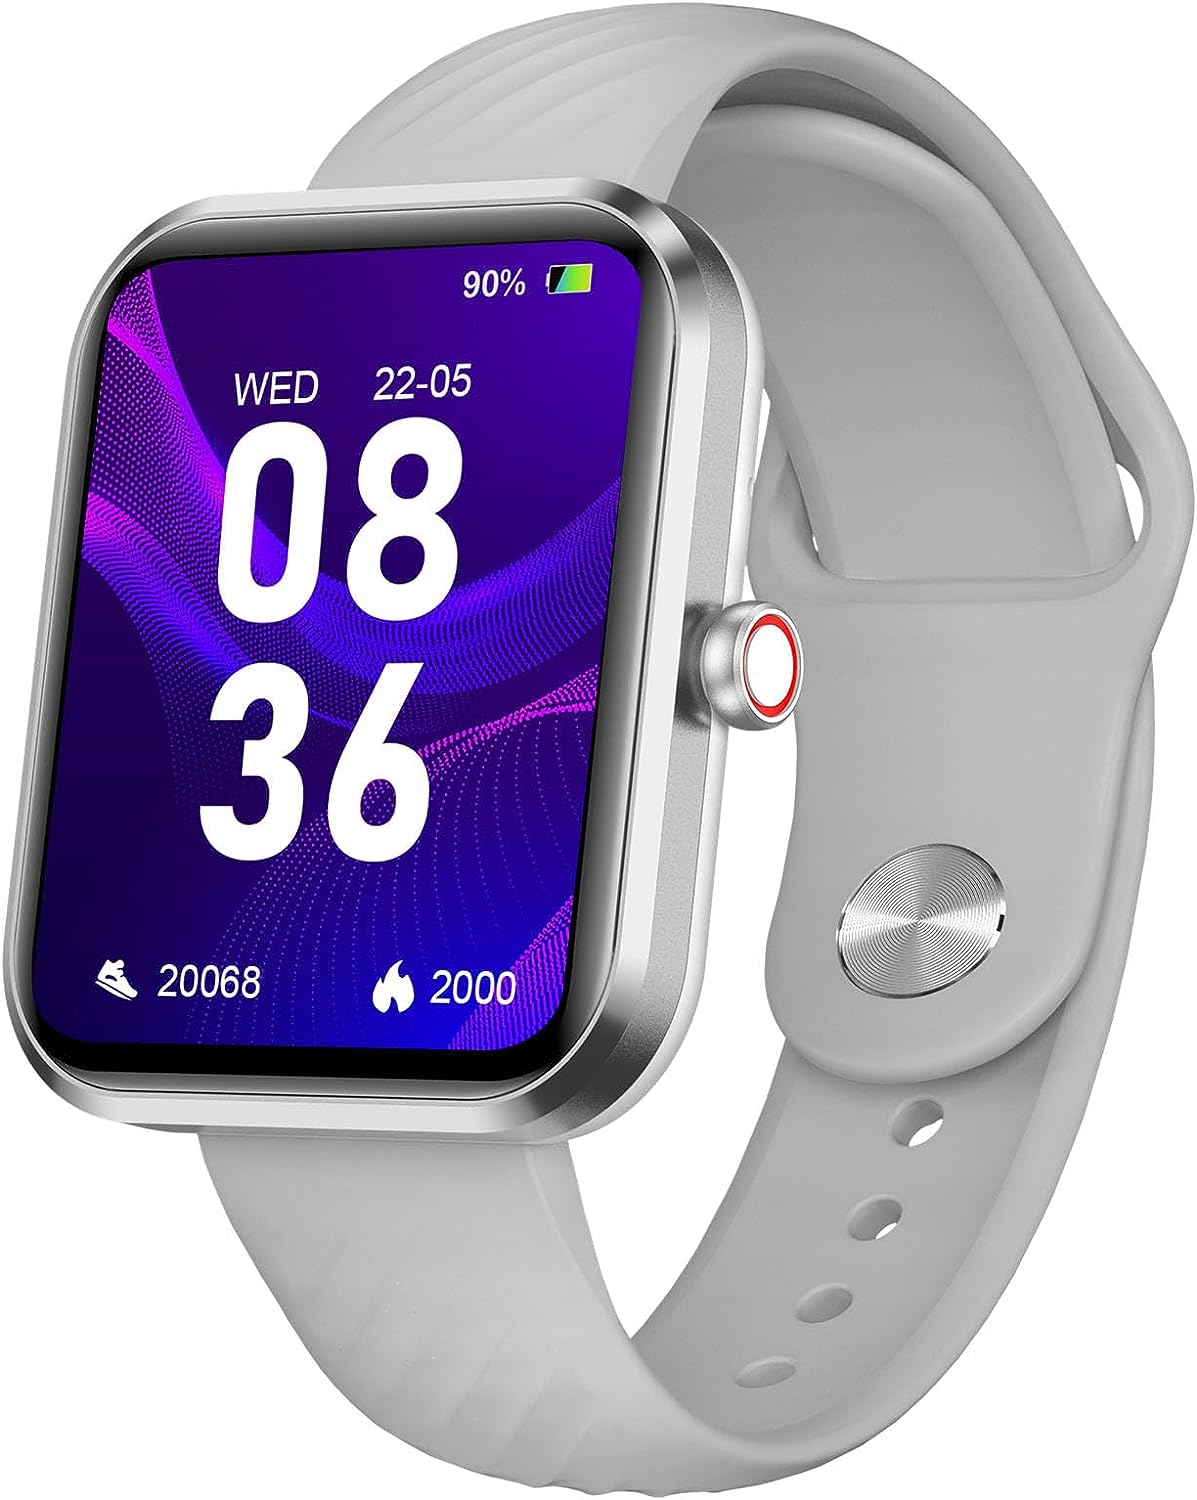 beatXP Marv Aura 1.83” HD Display Bluetooth Calling Smart Watch, Metal Body, 240 * 284 px, 500 Nits, 60 Hz Refresh Rate, Always On Display, 100+ Sports Modes, 24×7 Health Tracking, IP67 (Ice Silver)